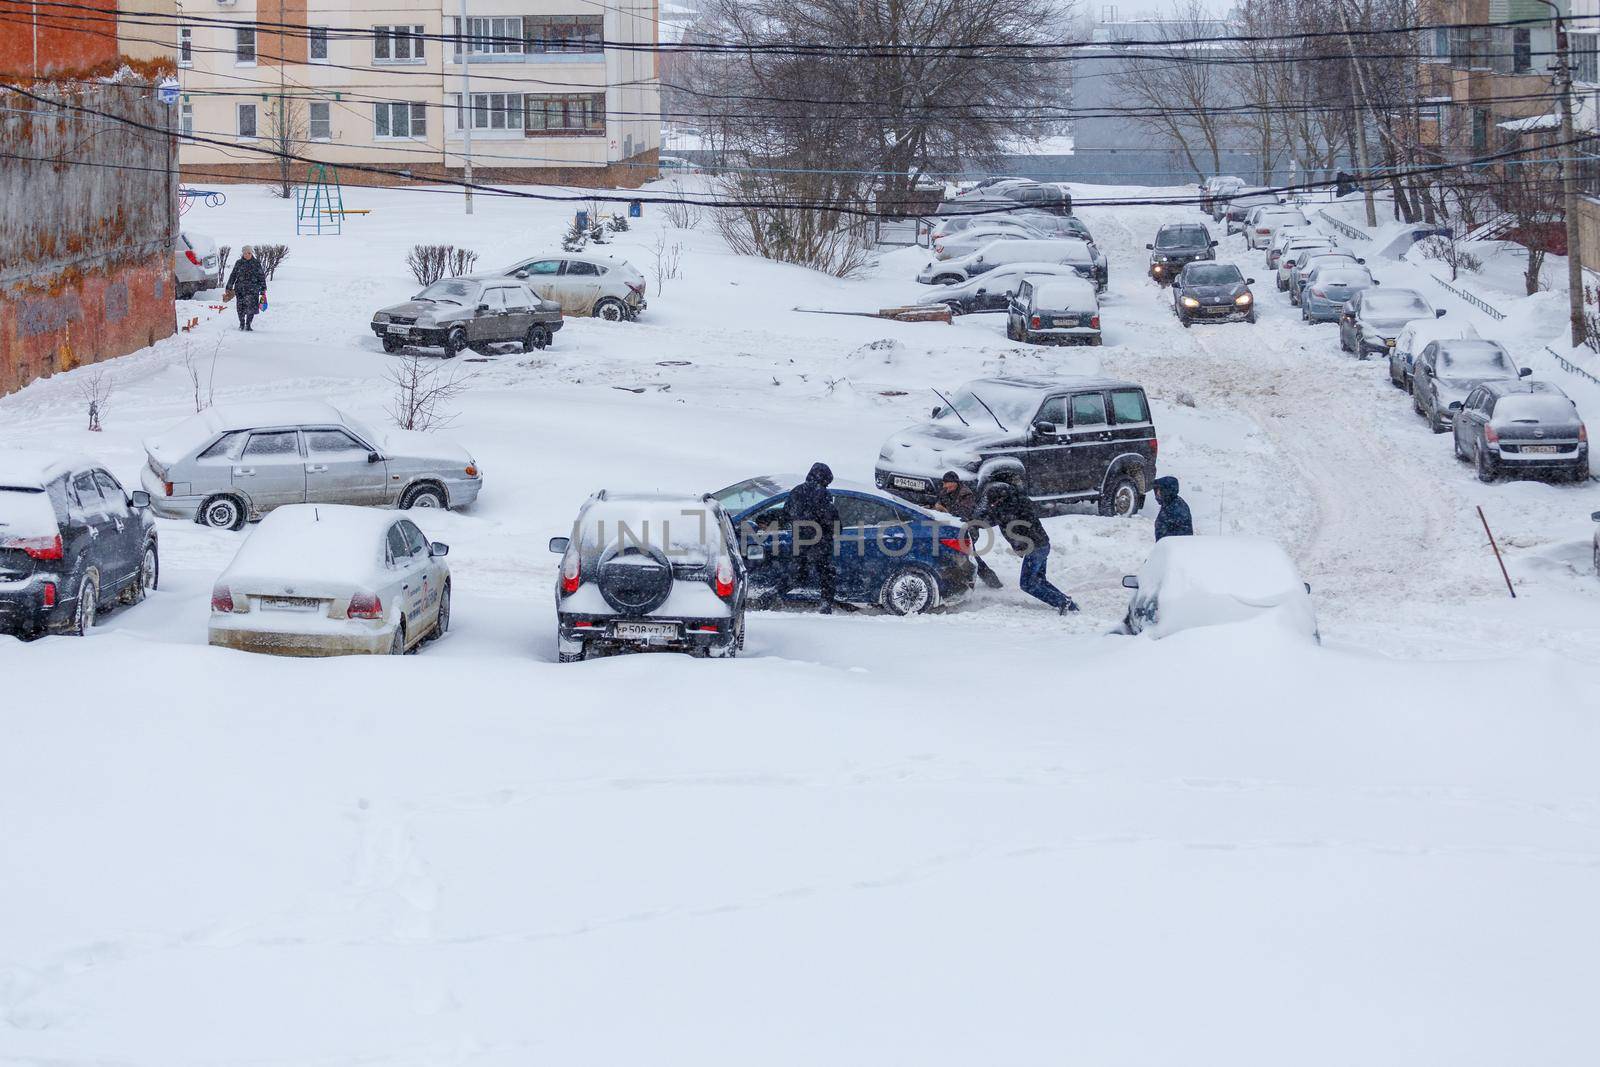 Two men pushing stuck Hyundai Solaris car through a snowy yard between rows of parked cars in deep snow in slope. by z1b